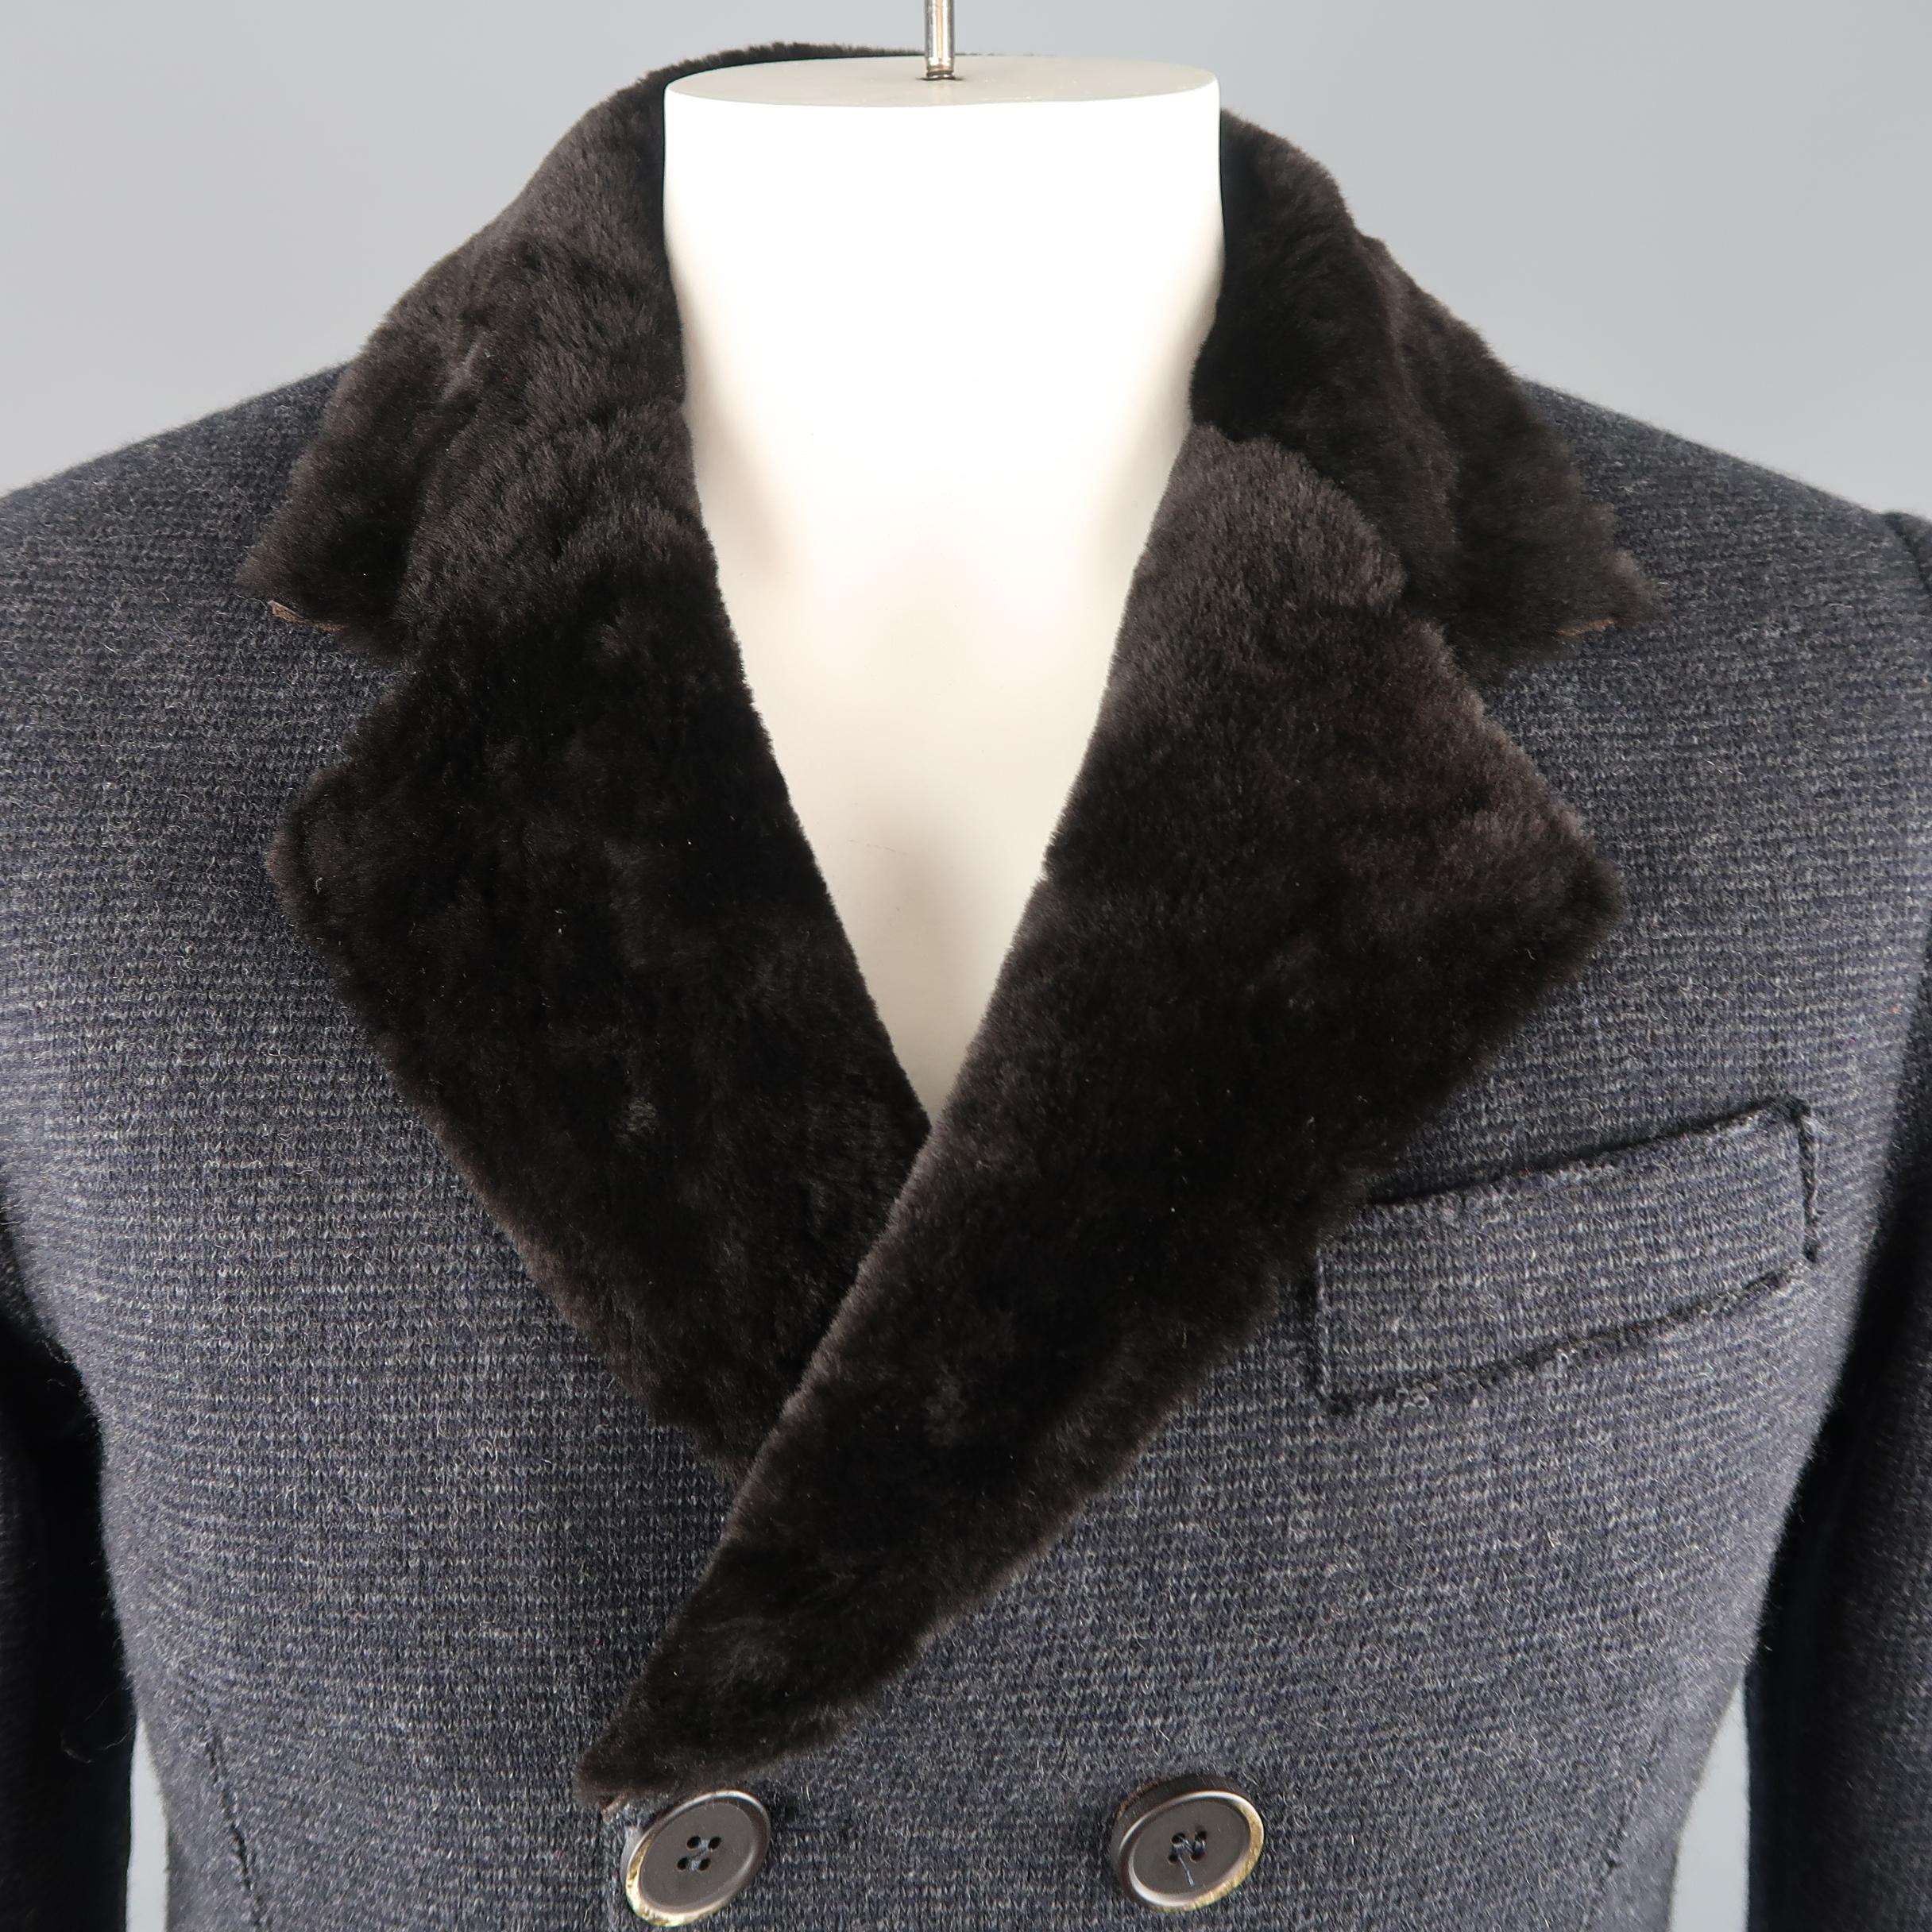 GMS-75 over coat comes in navy and gray wool blend knit fabric with a double breasted button up front, flap pockets, suede elbow pads, brown shearling lapel, and faux fur liner.
 
Excellent Pre-Owned Condition.
Marked: (no size)
 
Measurements:
